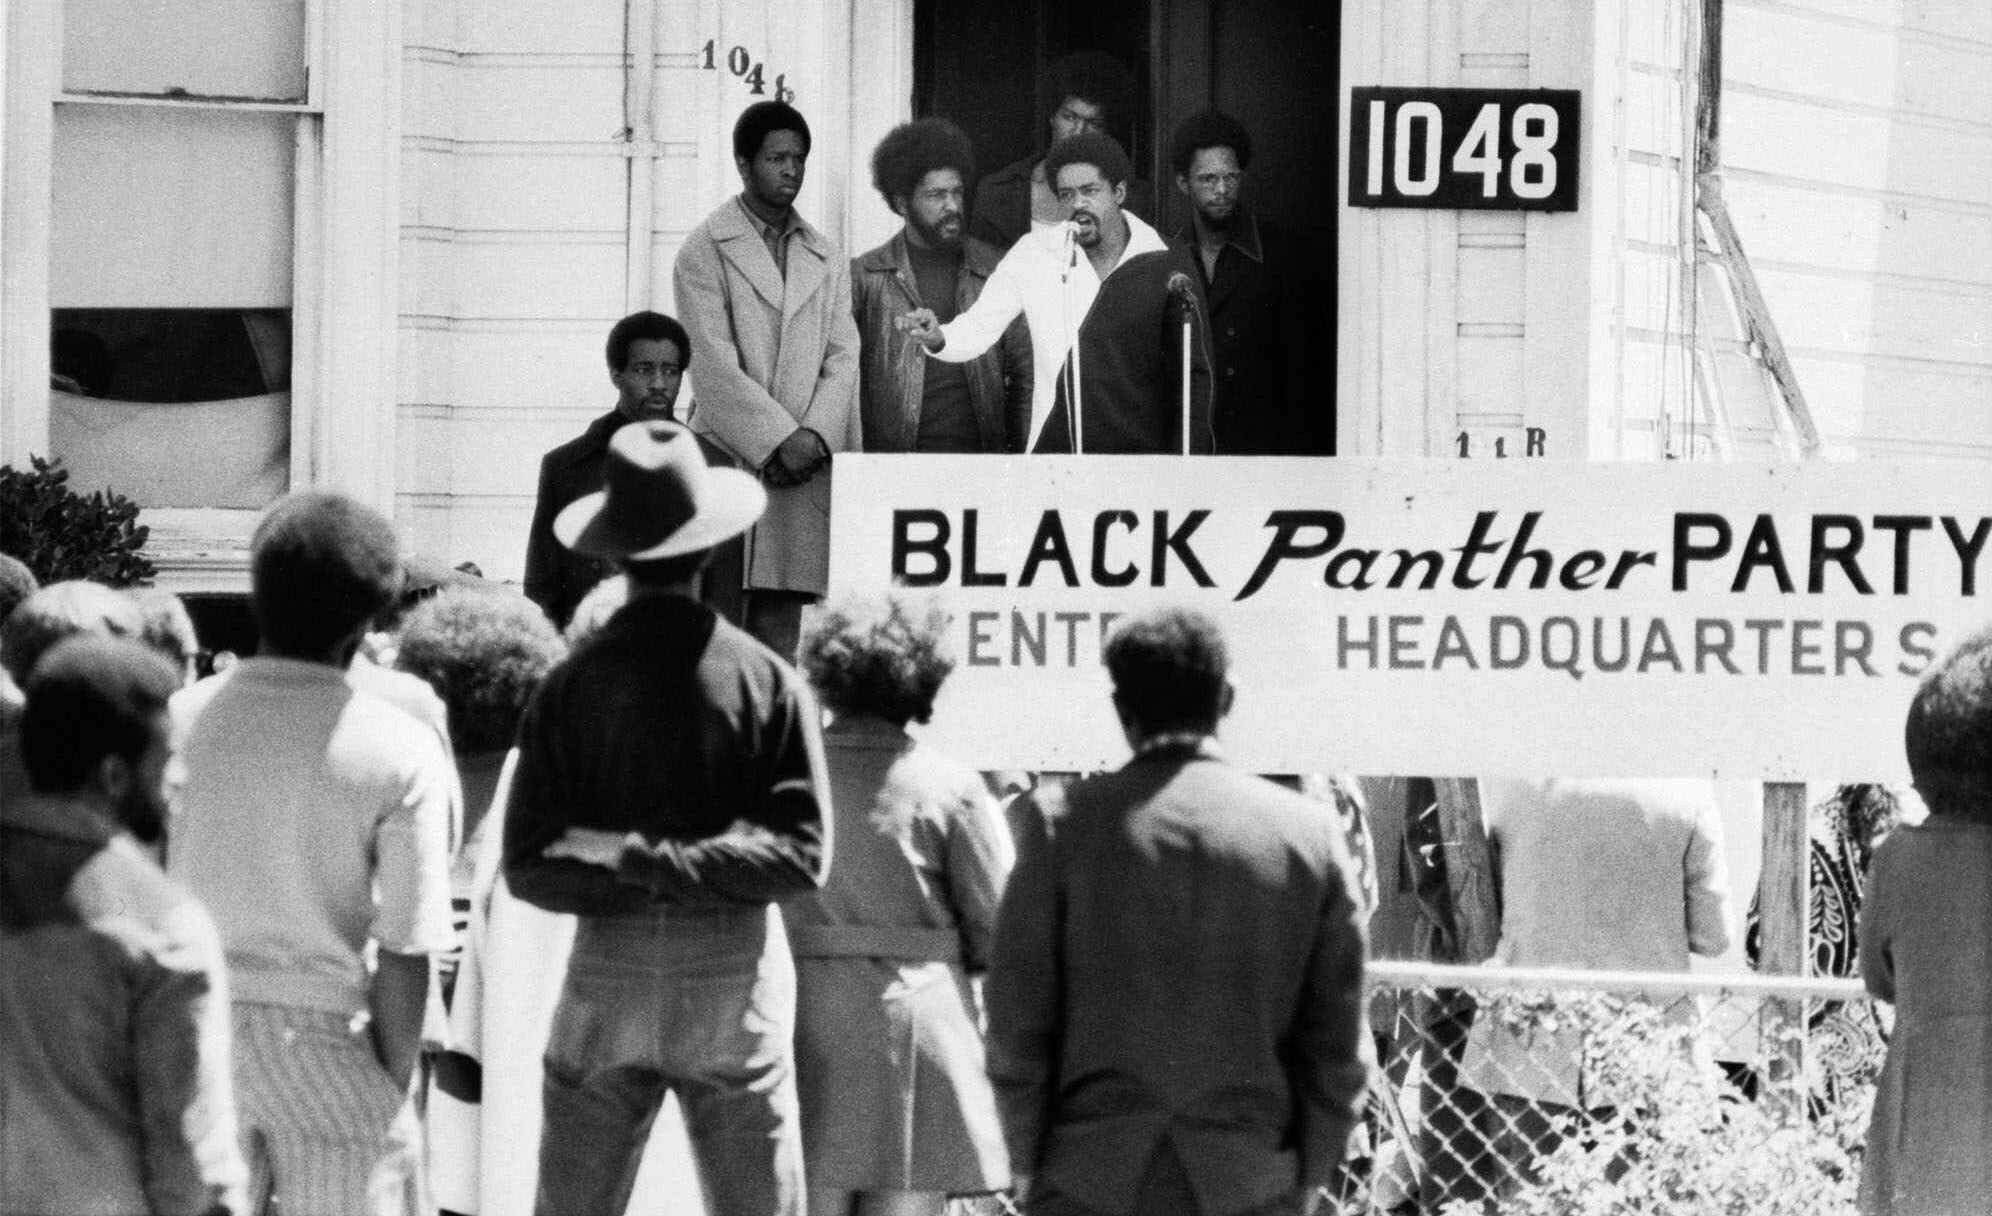 Bobby Seale, chairman of the Black Panther Party, addresses a rally outside the party headquarters Aug. 13, 1971, in Oakland, Calif., urging members to boycott certain liquor stores.